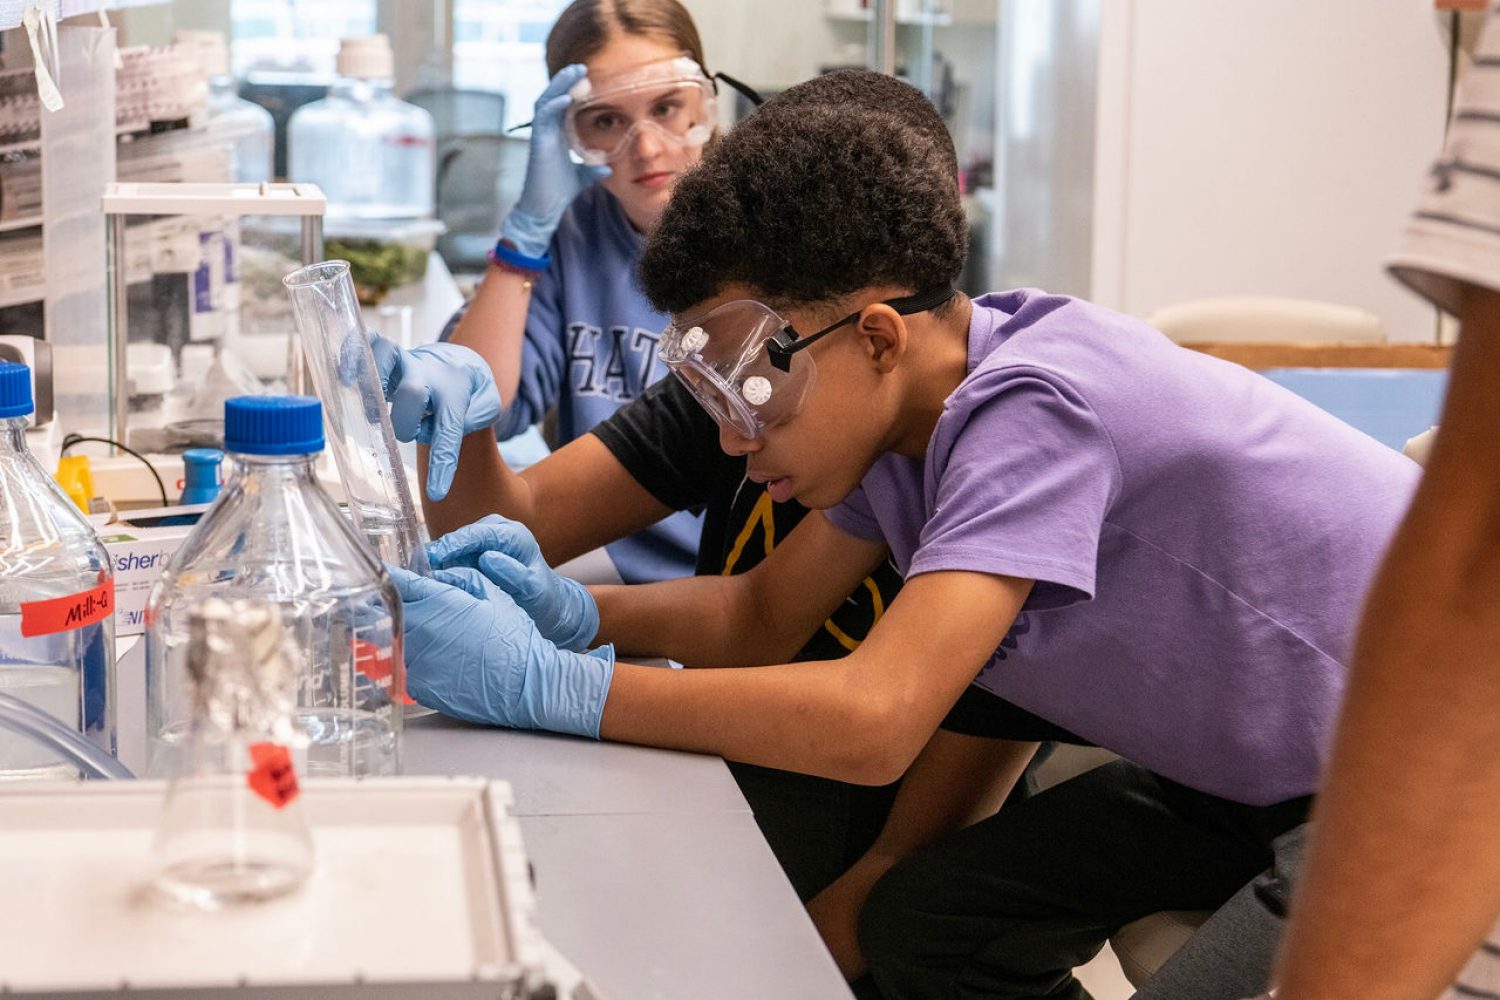 Participants in The Academy—a summer enrichment program for eighth and ninth graders run by Boston College’s Pine Manor Institute for Student Success—worked on an experiment at 245 Beacon Street.